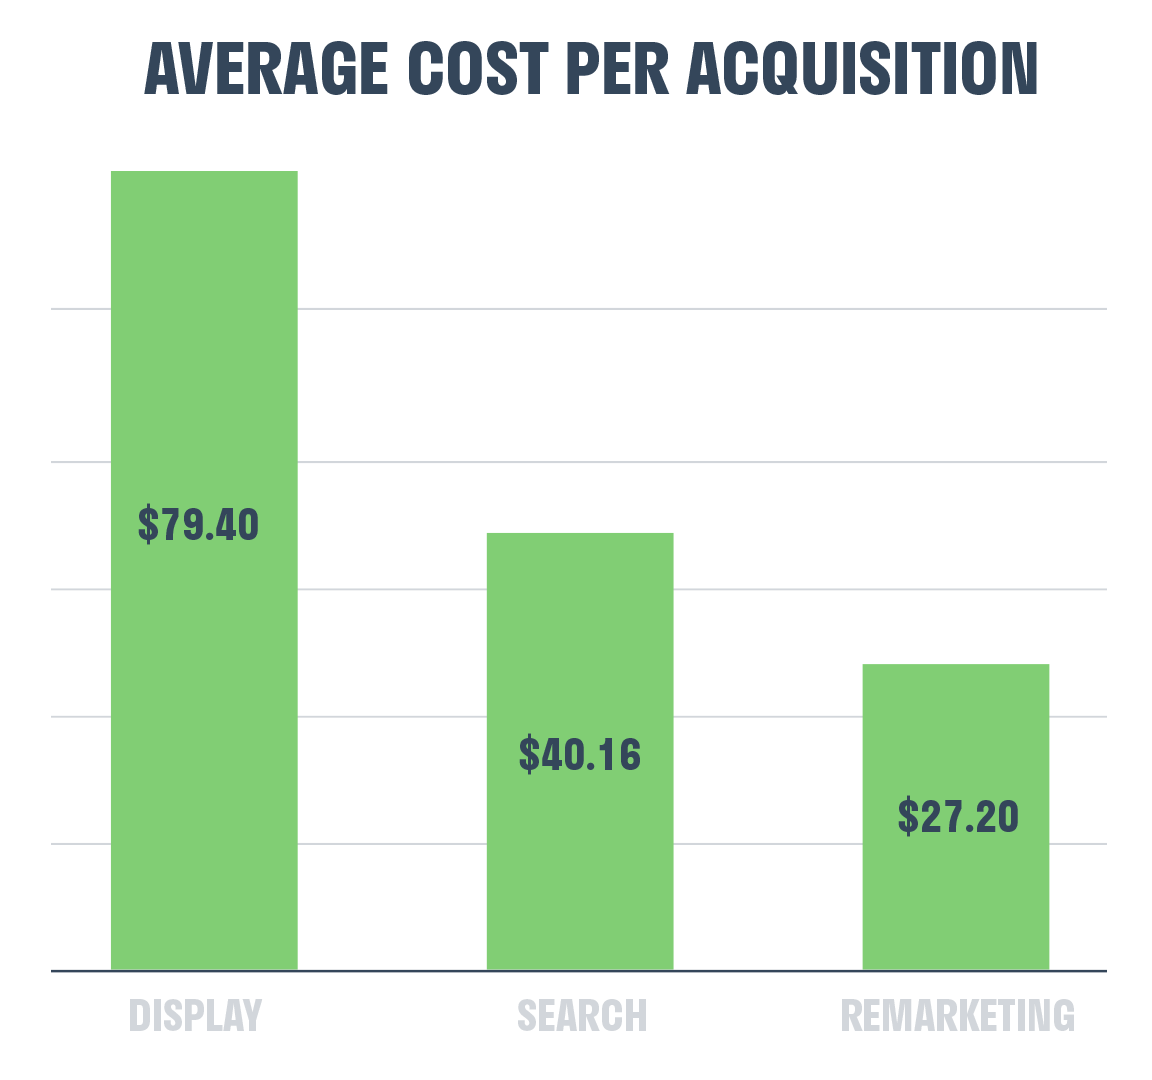 display_search_remarketing_cost_per_acquisition